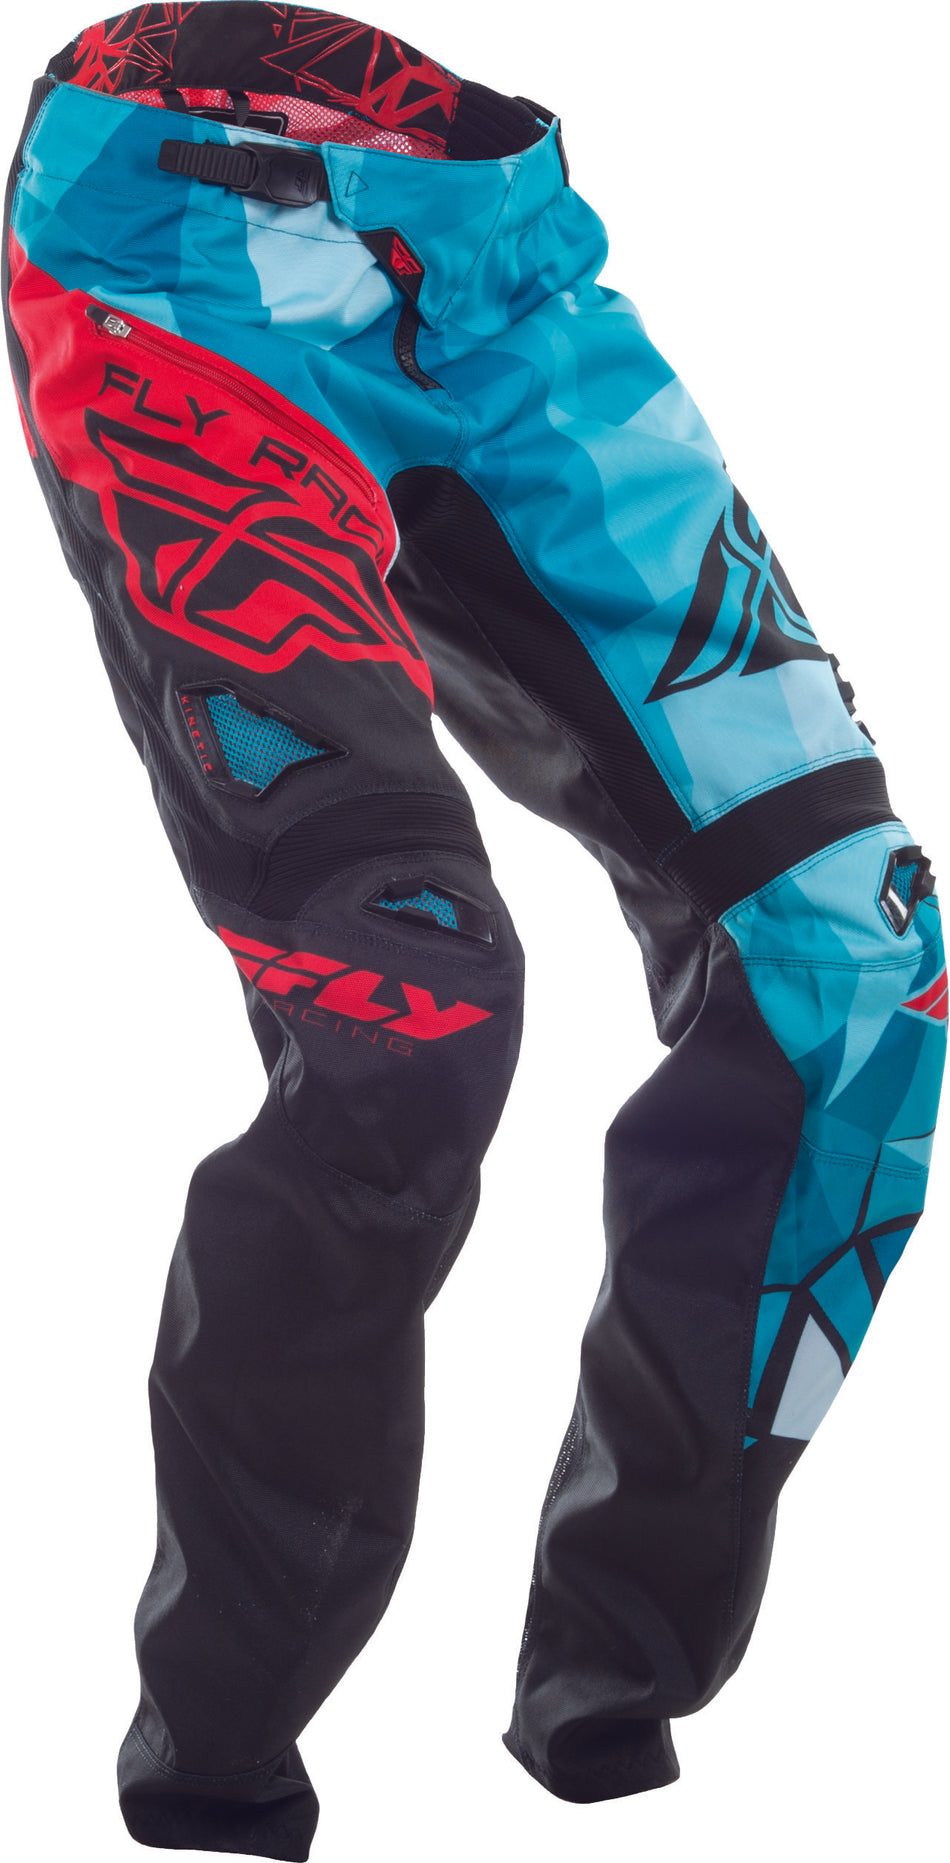 FLY RACING Bicycle Crux Pant Black/Teal/Red Sz 20 370-02920